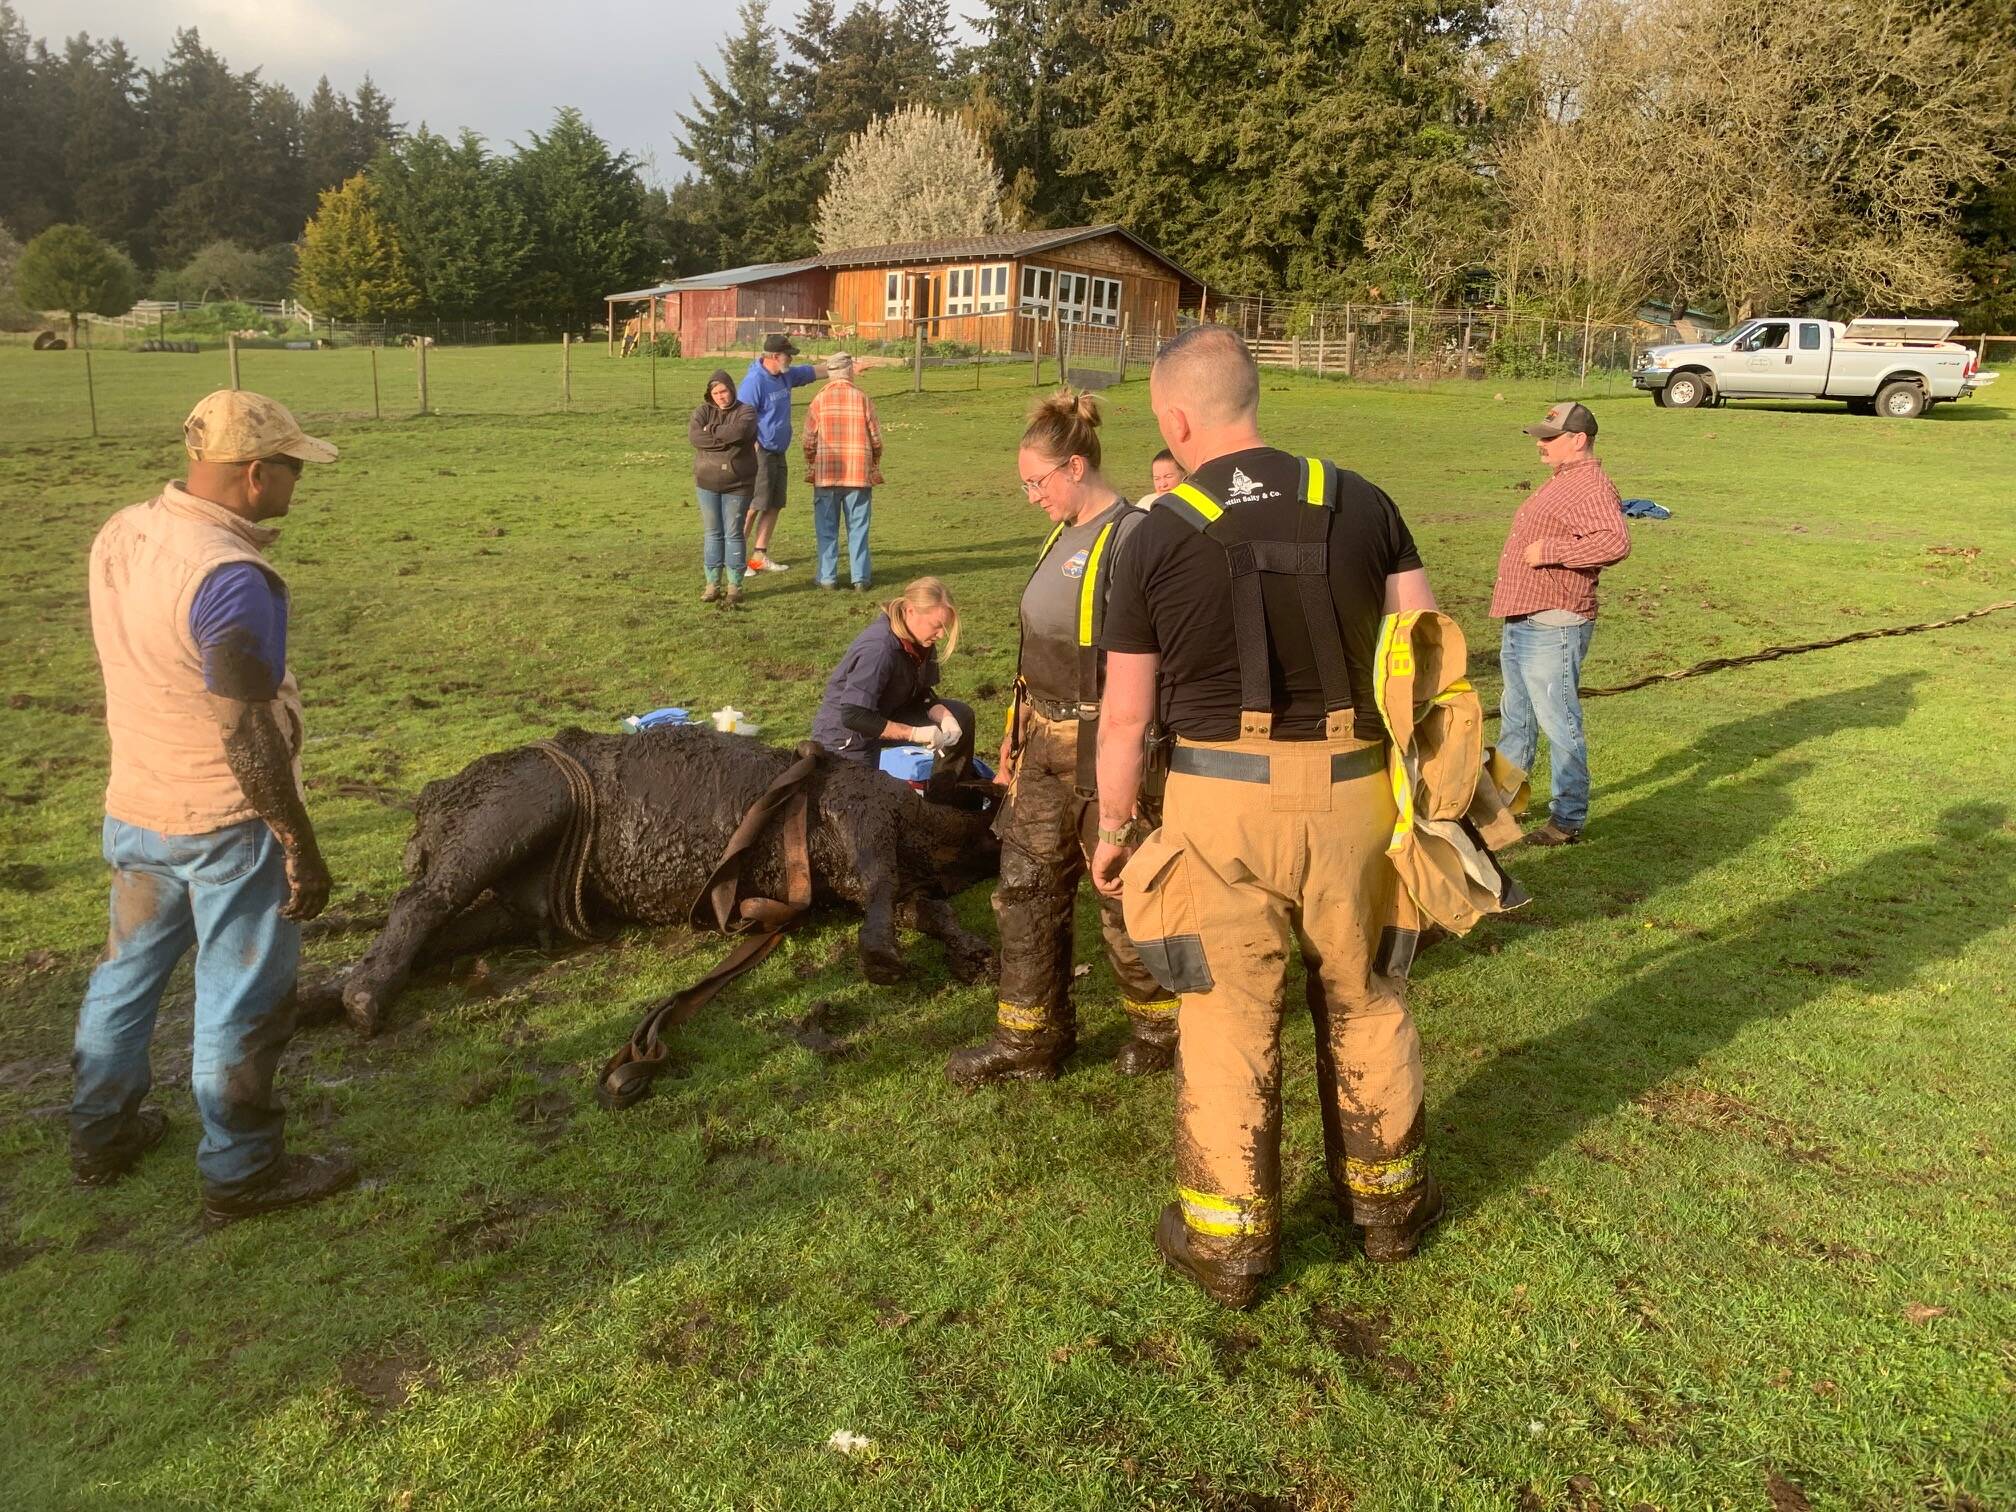 Photo provided
A South Whidbey cow was saved from a muddy predicament this week by South Whidbey Fire/EMS.